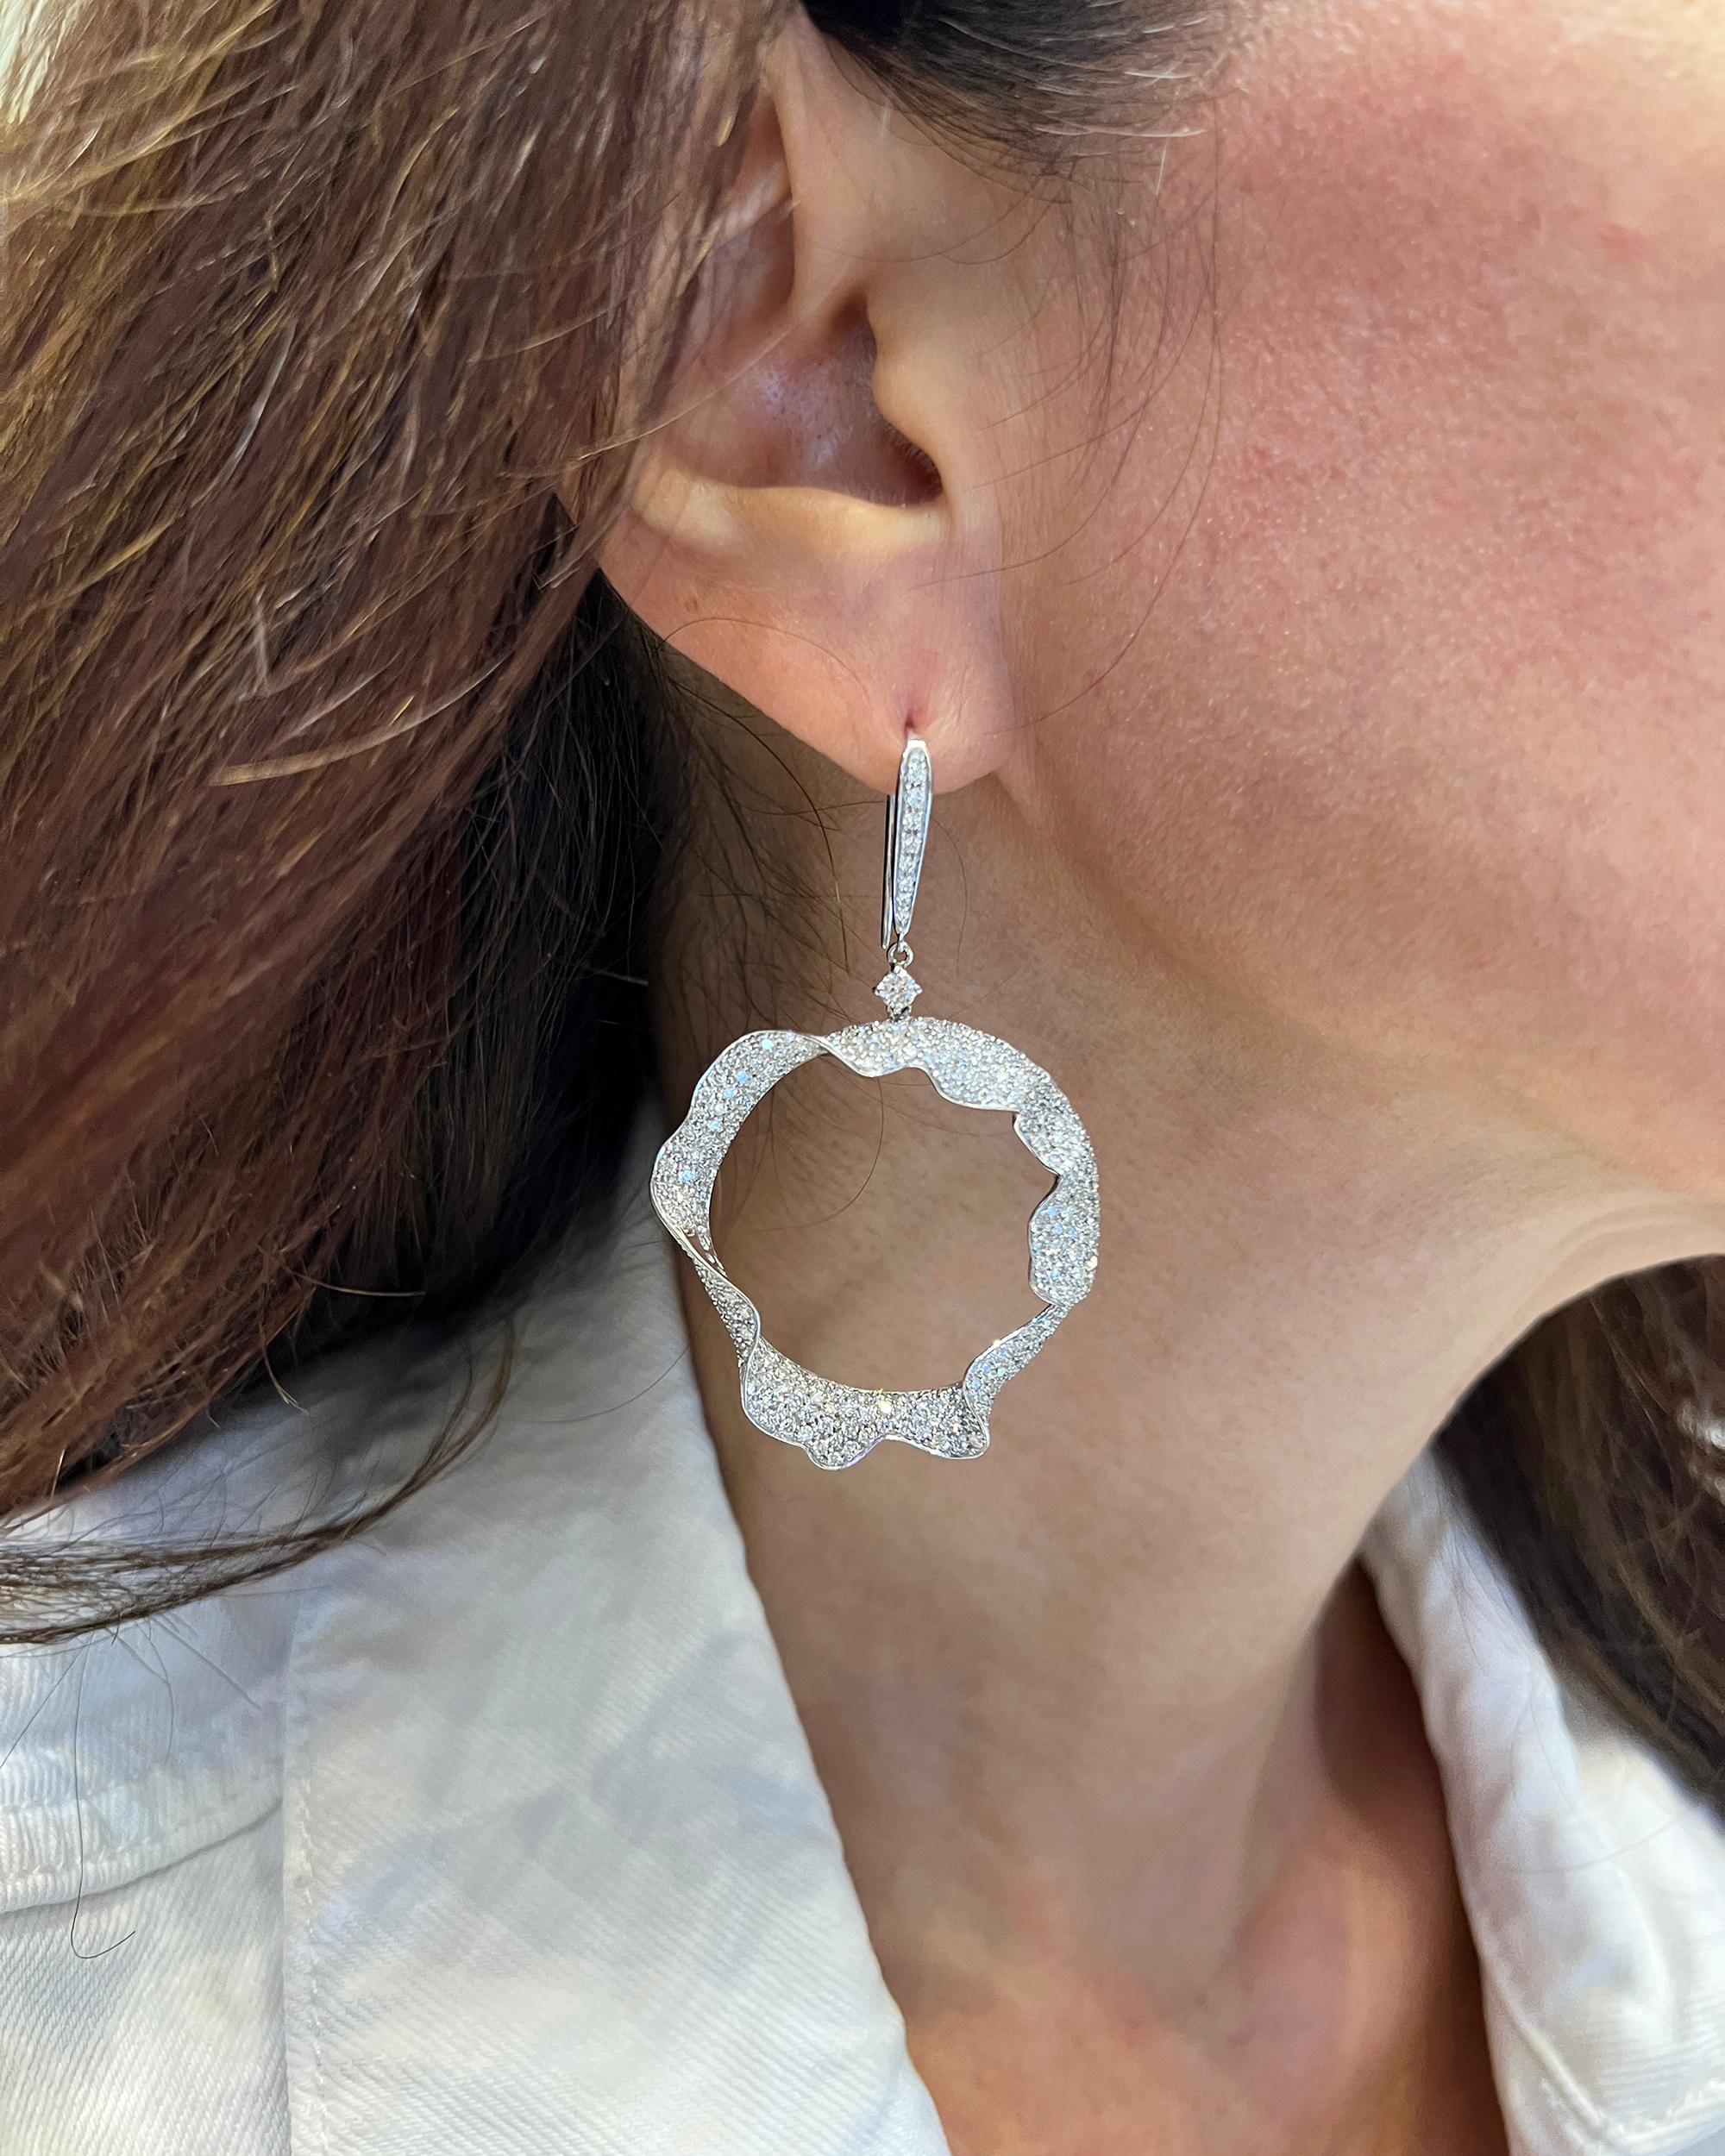 A beautiful pair of hanging earrings made by Palmiero in Italy.
Round diamonds weighing a total of 7.21 carats with G-H color, VS clarity.
Metal is 18k white gold; gross weight is 20.94 gr.
Retail $41,618.
Measurements:
L: 2.5 ins (6.5 cm)
W: 1.5